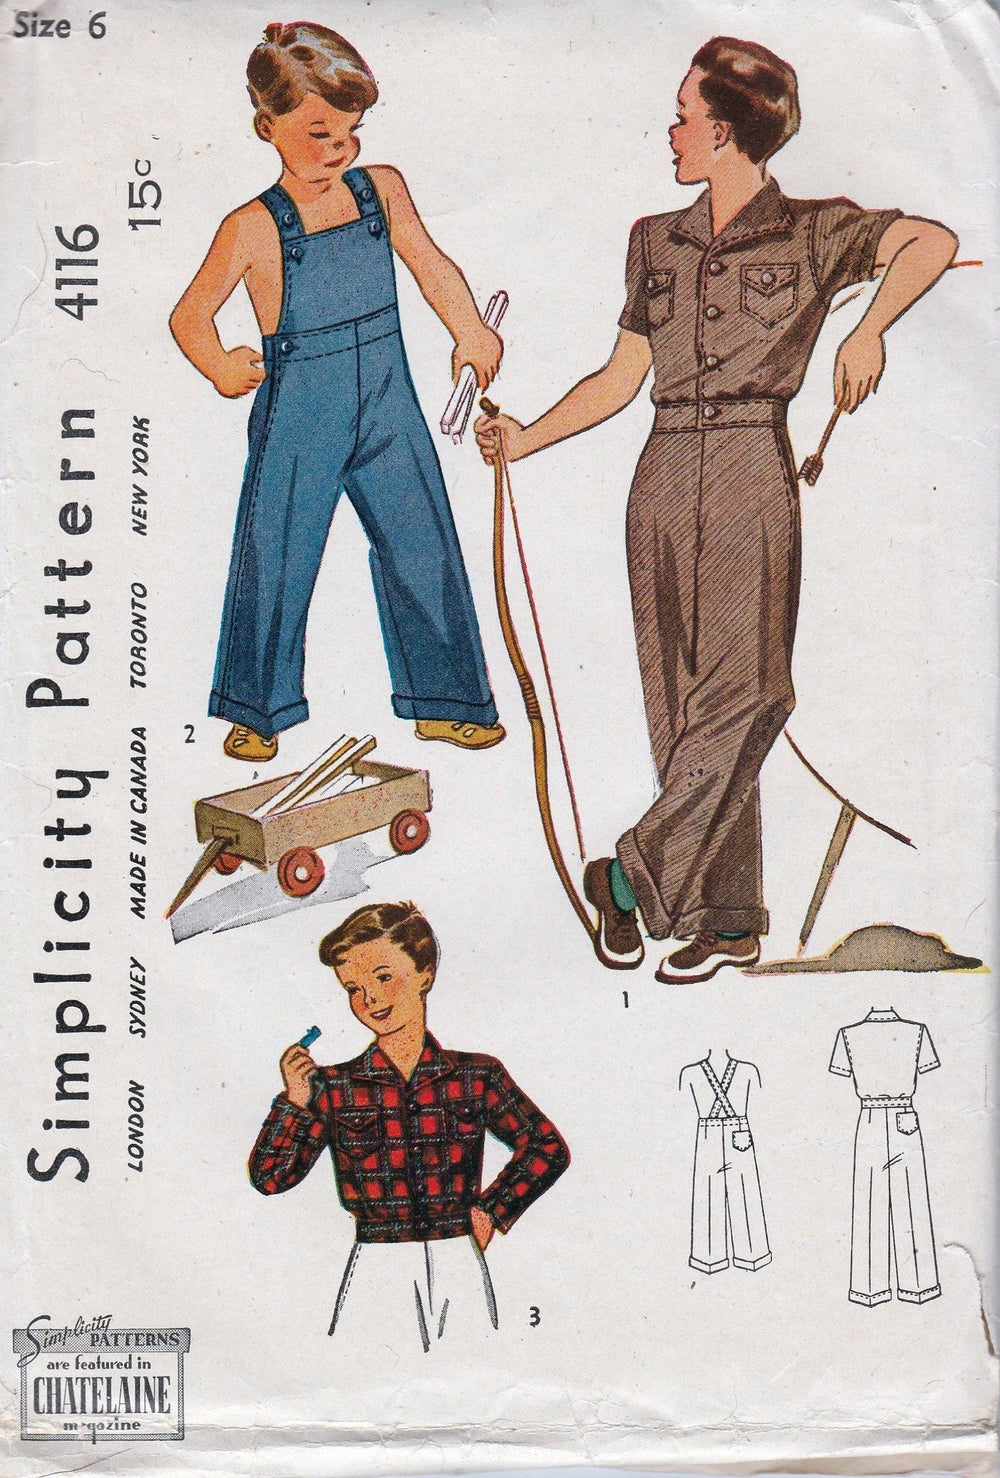 Simplicity 4116 Young Boys Overalls Lumber Jacket Vintage Pattern 1940's - VintageStitching - Vintage Sewing Patterns